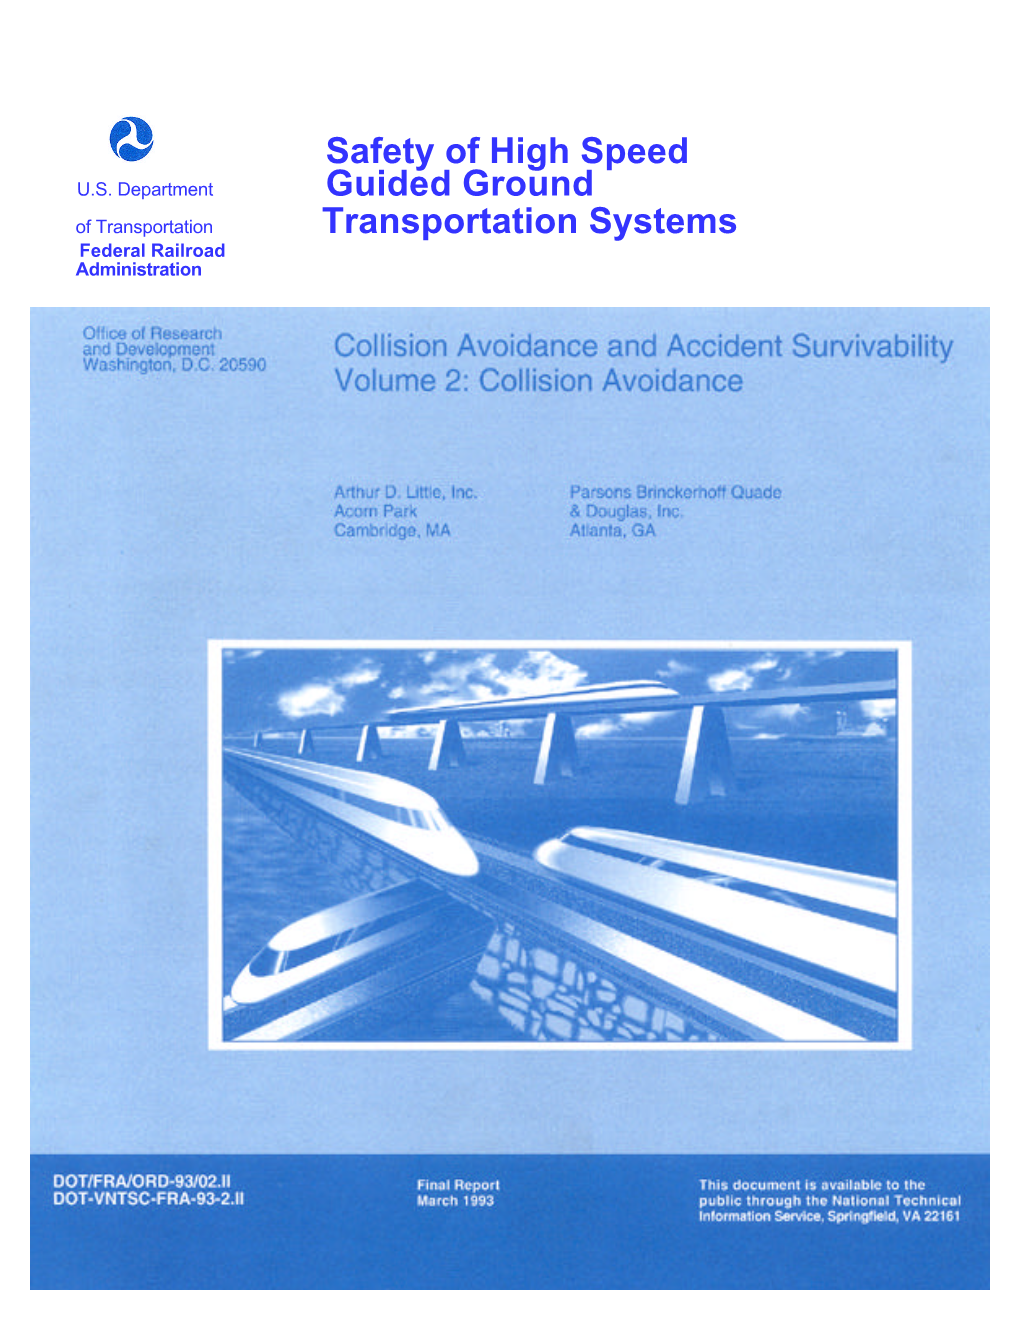 Safety of High Speed Guided Ground Transportation Systems; Shared Right of Way Safety Issues, DOT/FRA/ORD-92/13, 1992